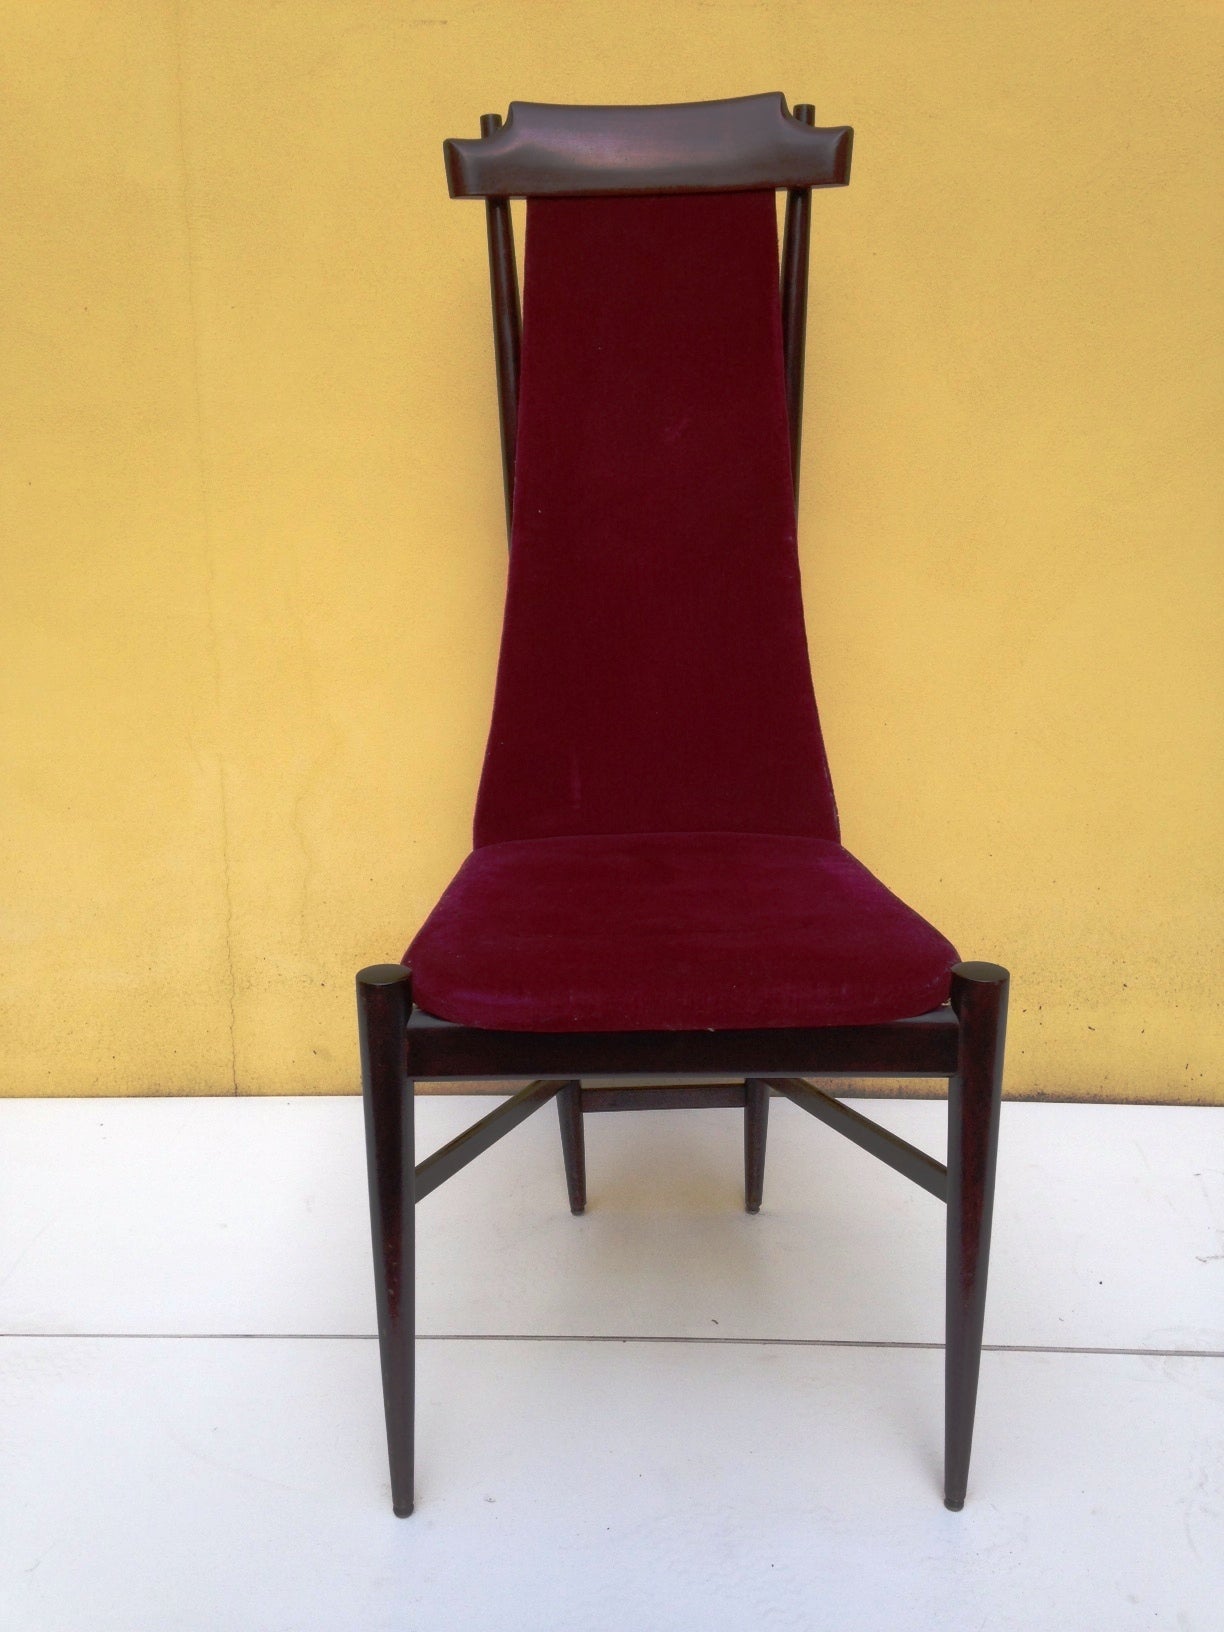 6 Italian chairs with a very high back